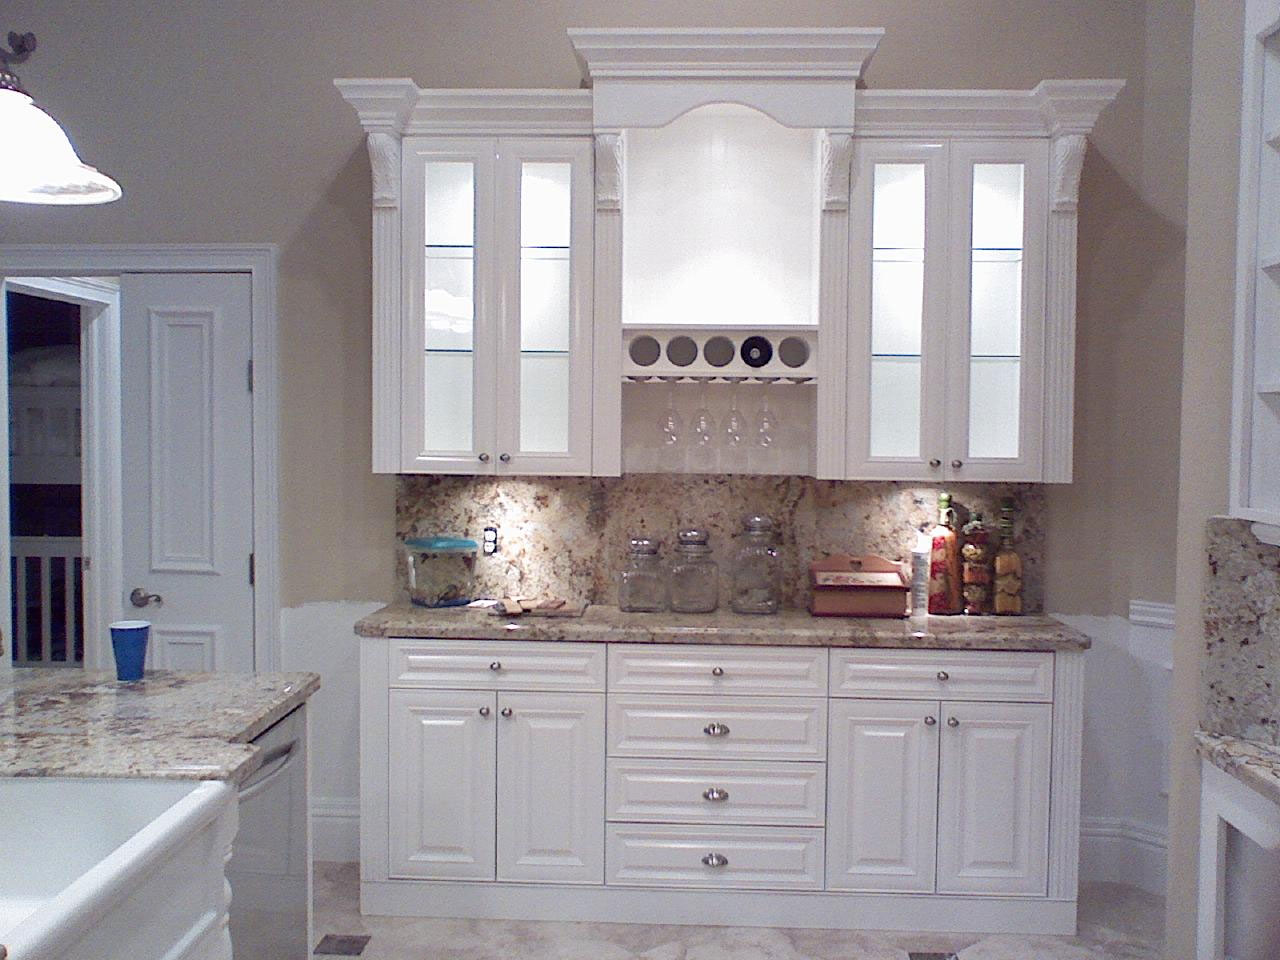 Refacing Kitchen Using Small Refacing Kitchen Cabinets Design Using White Color Made From Wooden Material Completed With Marble Countertop Kitchen Refacing Kitchen Cabinets For Contemporary Kitchen Interior